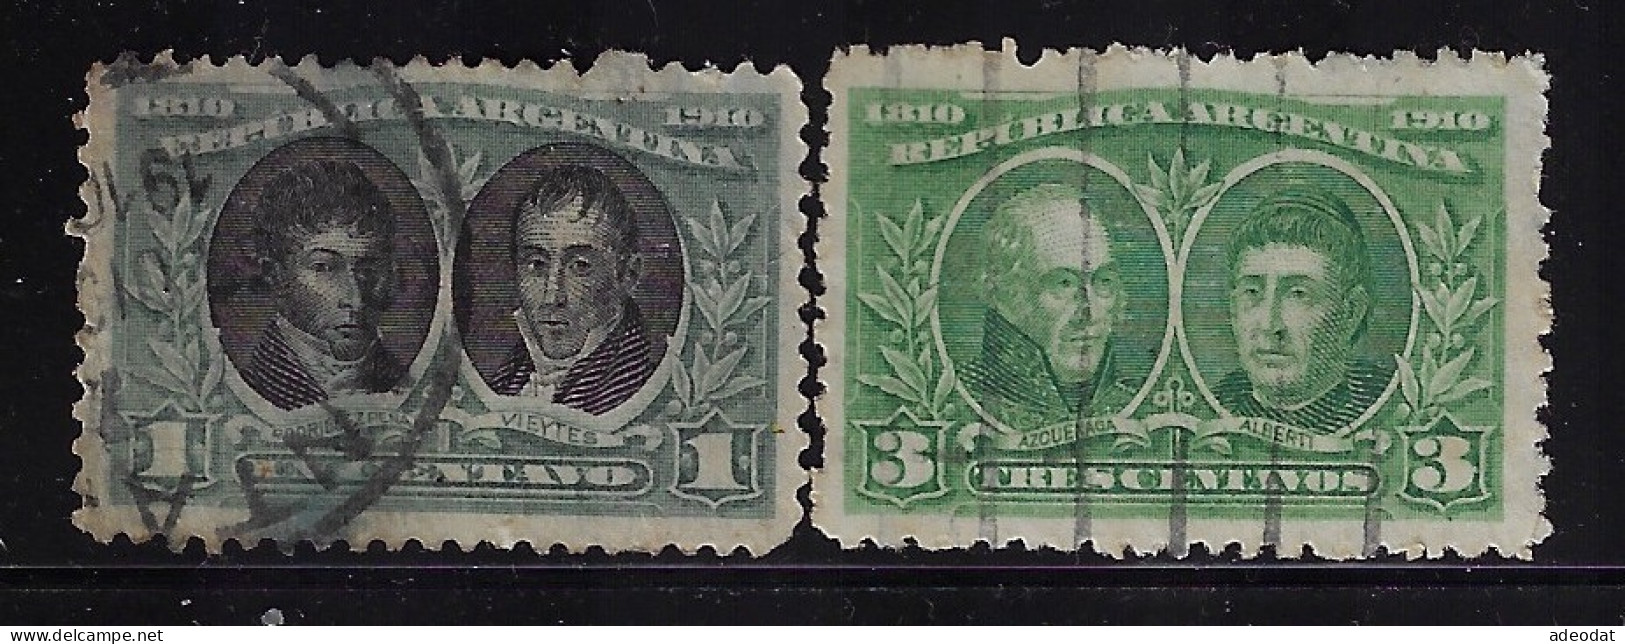 ARGENTINA  1910  SCOTT #161,163 USED - Used Stamps